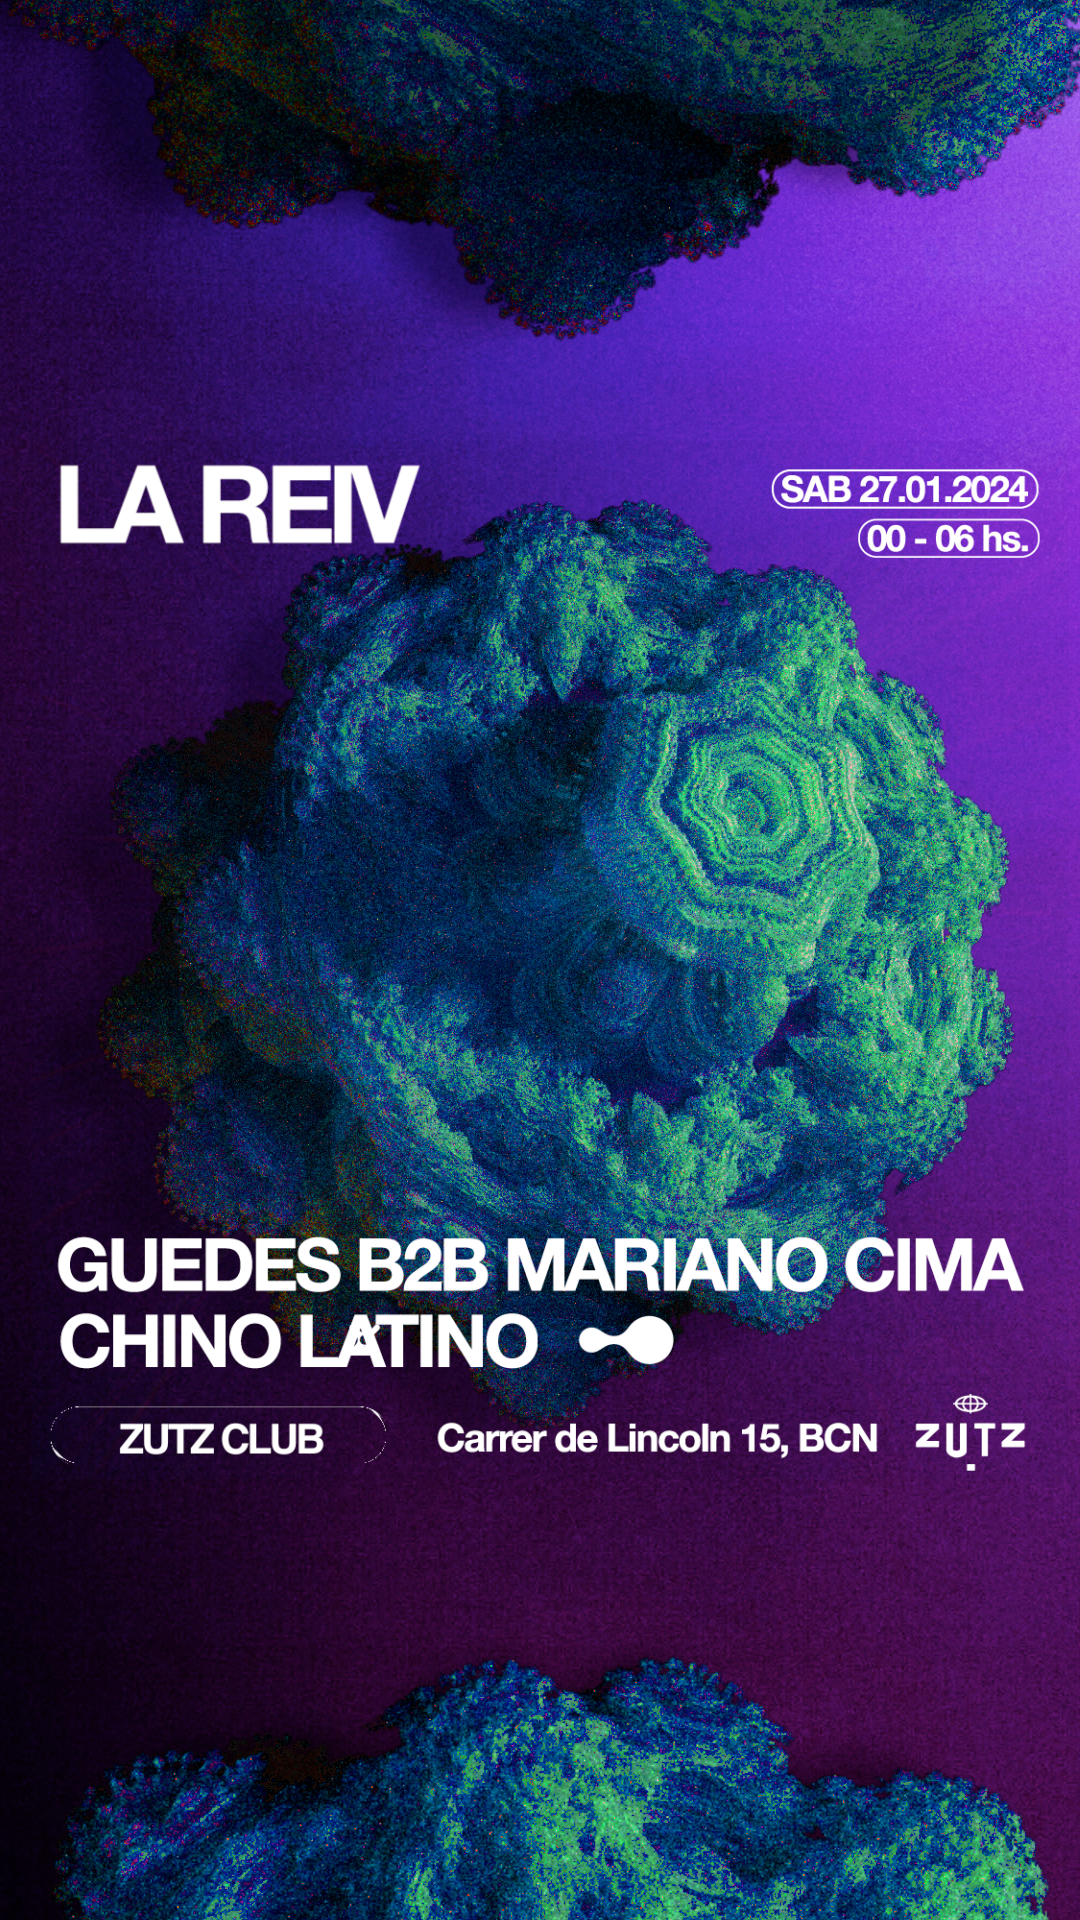 Zutz Club: La Reiv with Guedes, Mariano Cima and Chino Latino - フライヤー表